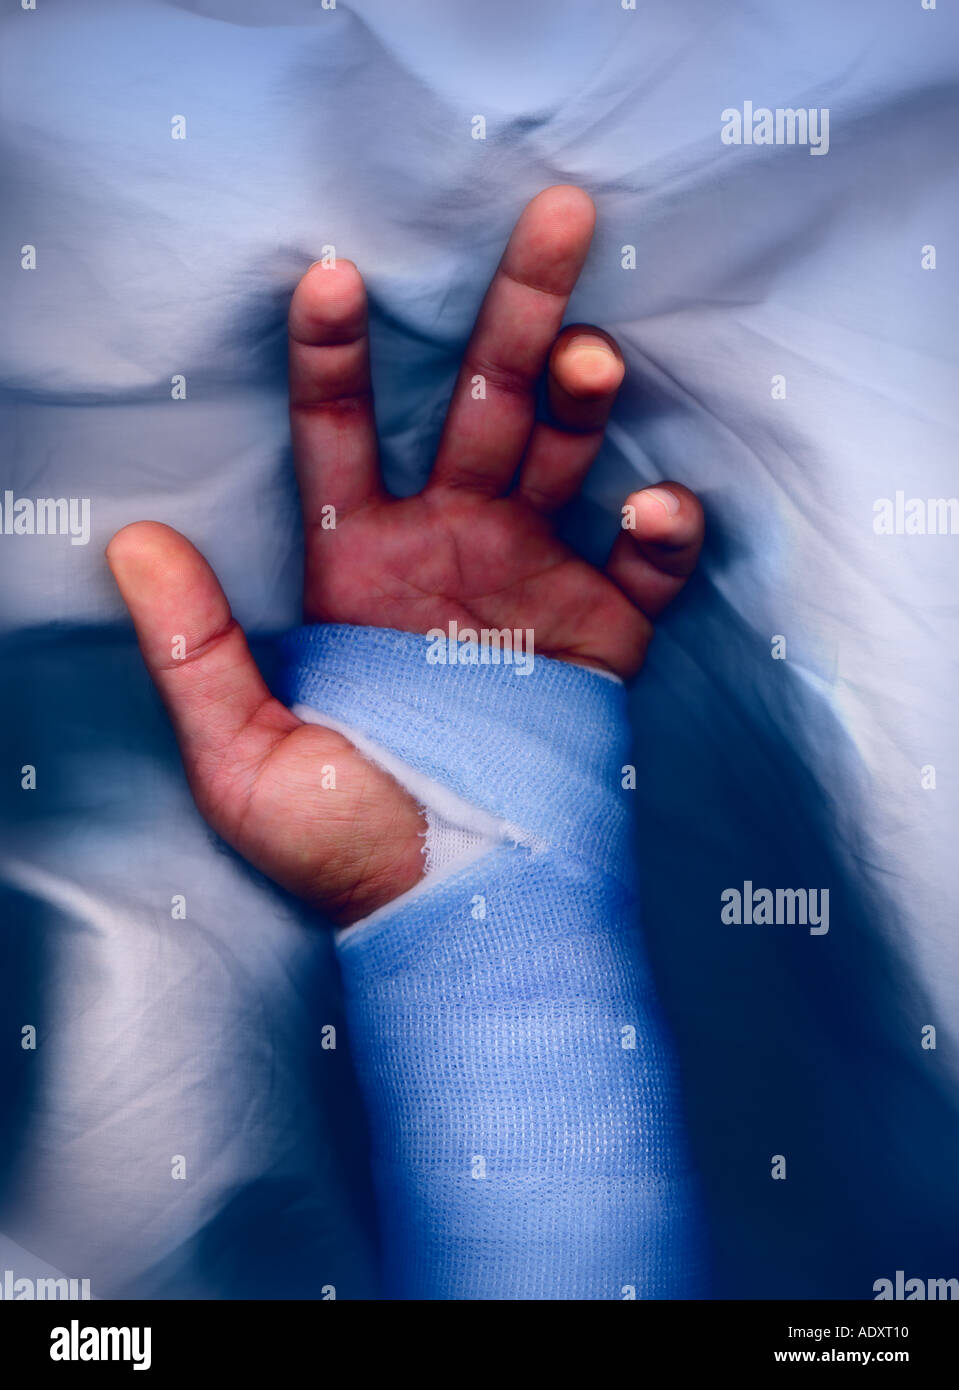 Hand in Cast on White Background Stock Image - Image of fiberglass, hurt:  167244825